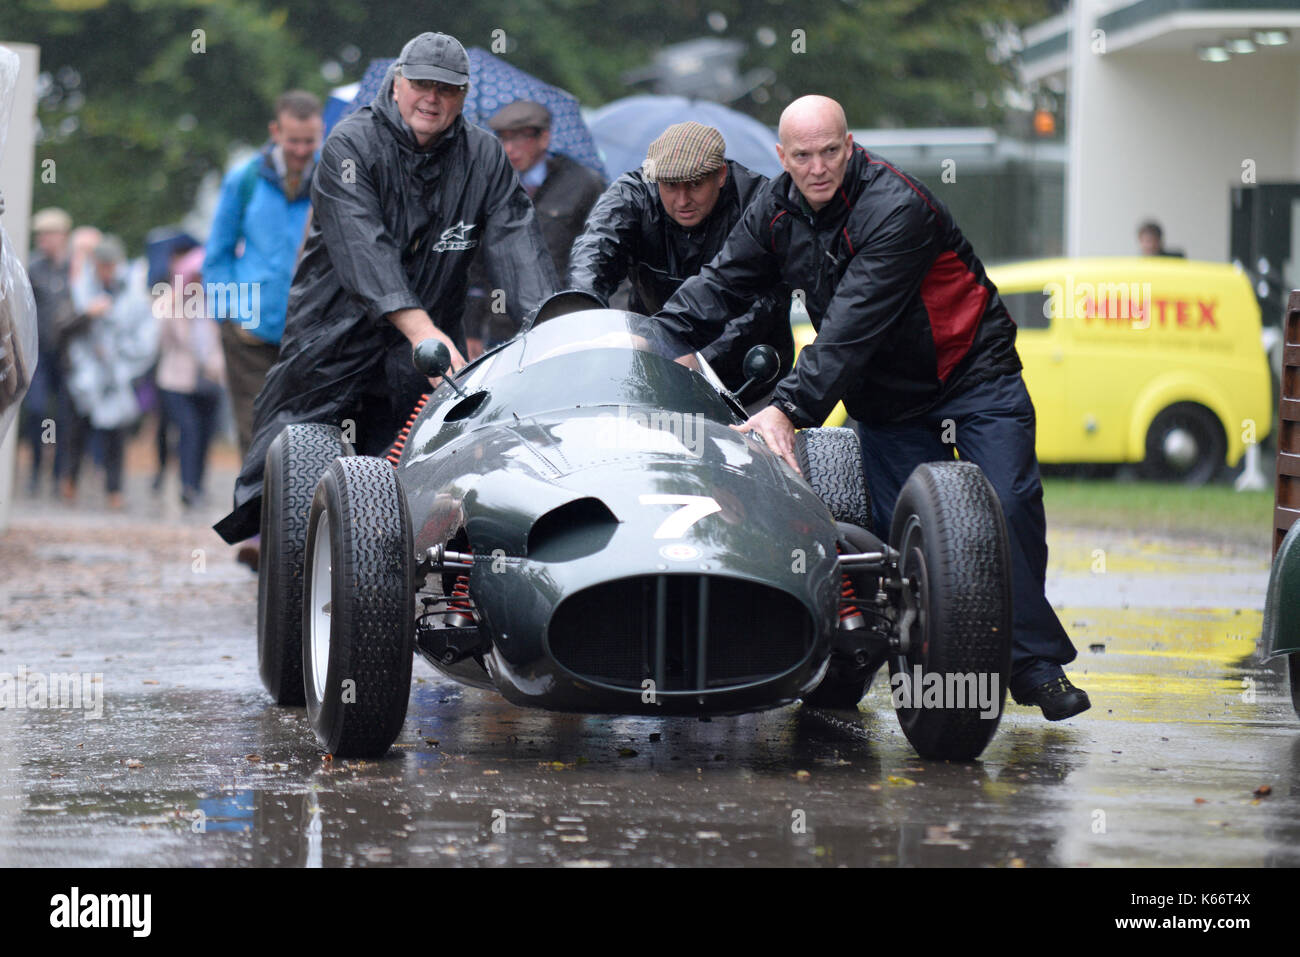 Vintage Grand Prix F1 racing car being pushed in rain by pit crew at Goodwood Revival 2017. Raining Stock Photo